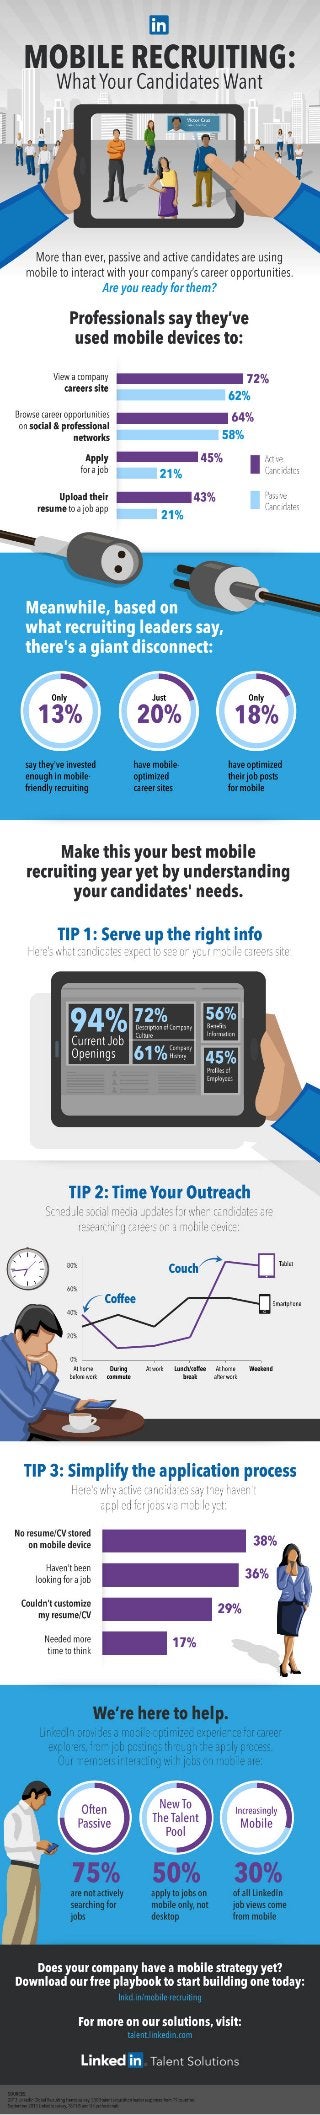 Mobile Recruiting Statistics That Will Give You Pause | INFOGRAPHIC